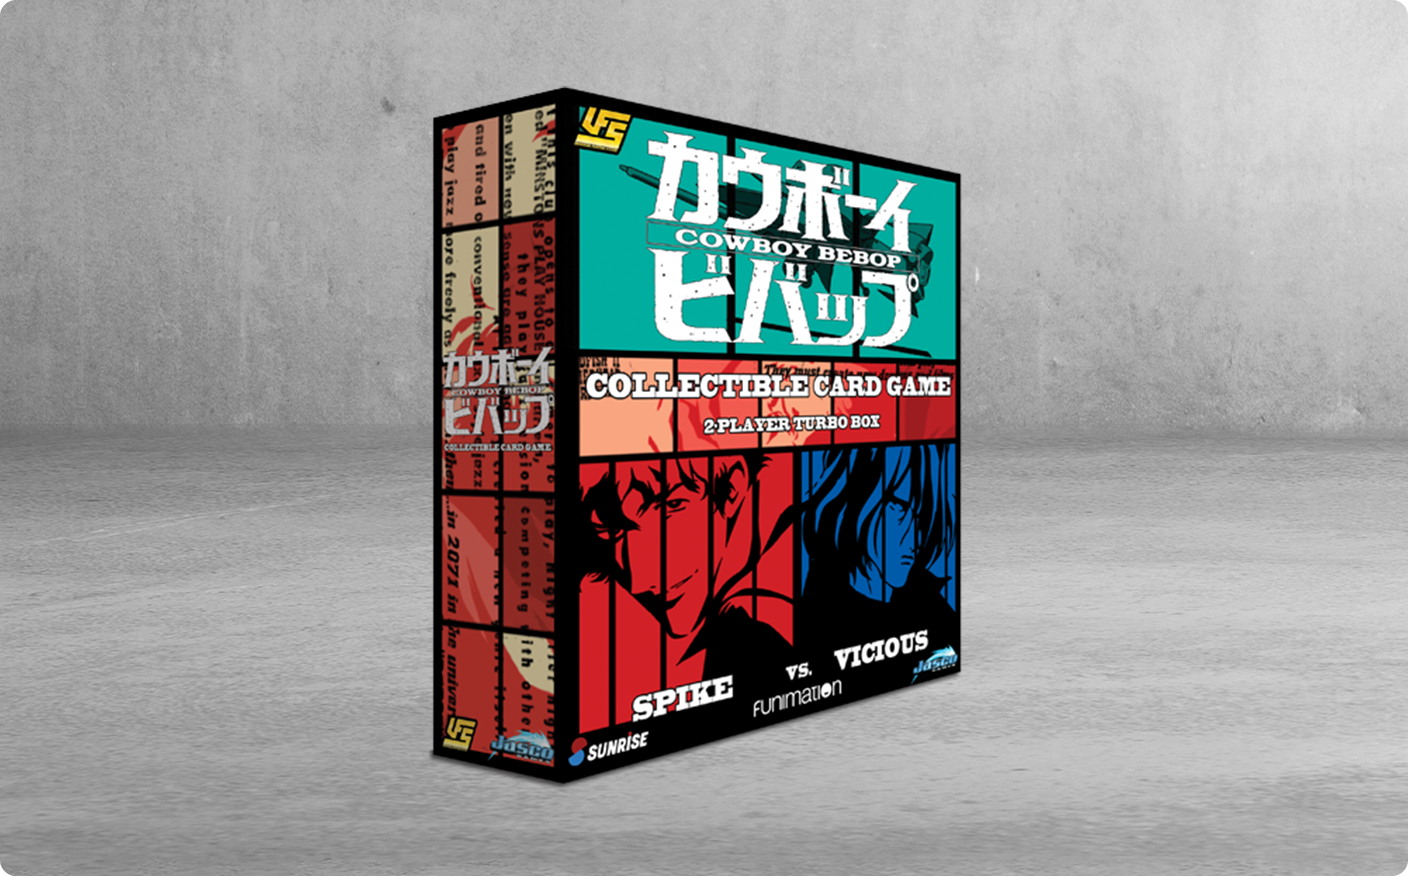 Cowboy Bebop Collectible Card Game 2-Player Turbo Box: Spike vs. Vicious